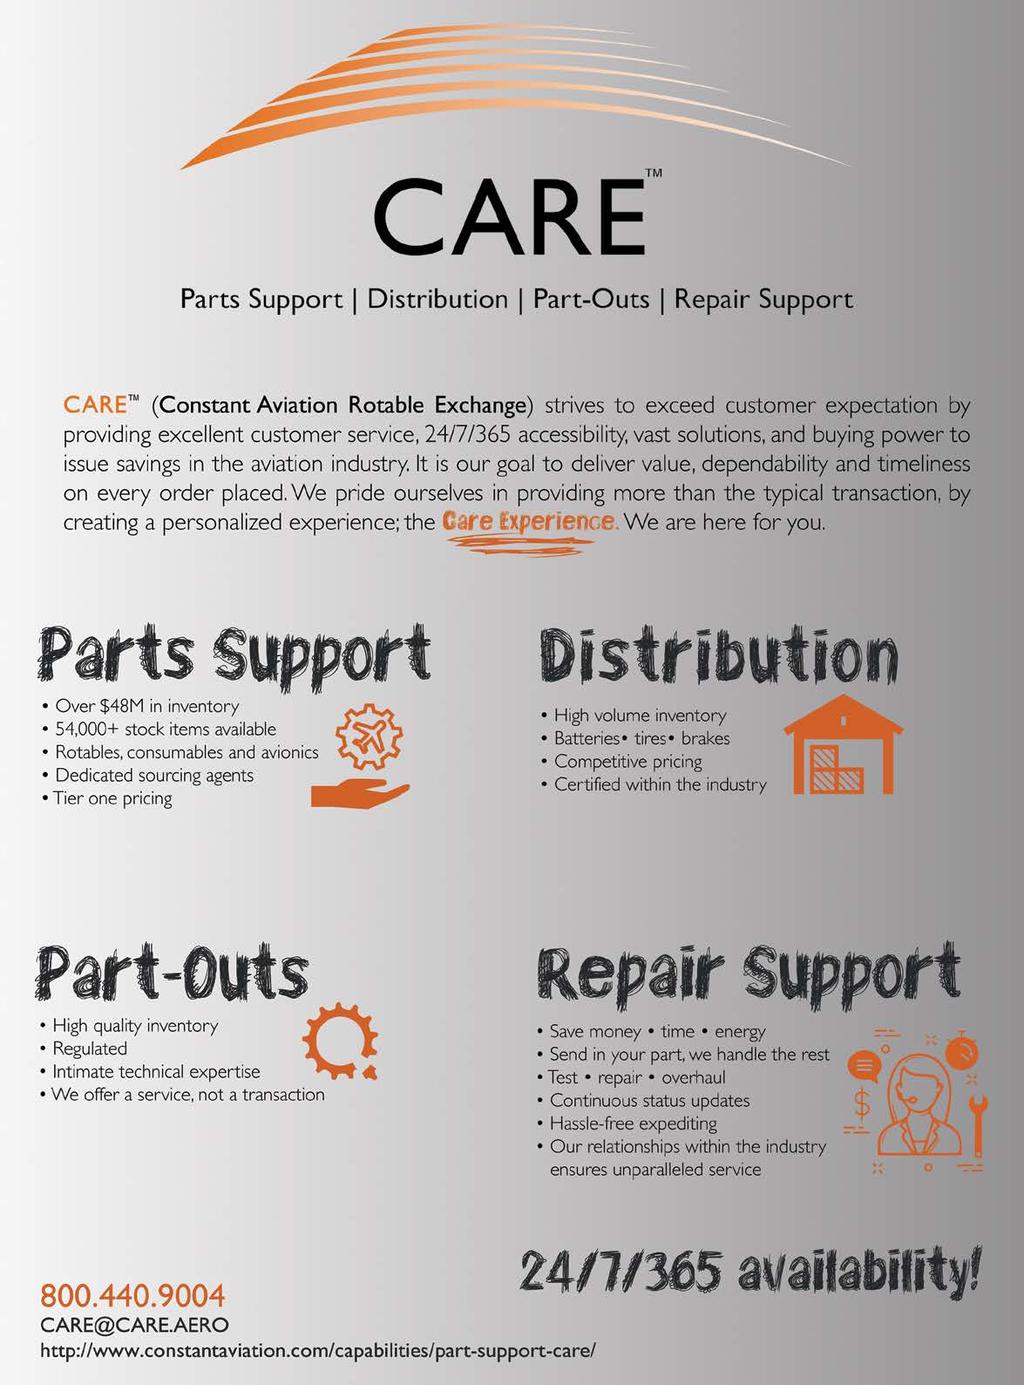 Parts Support